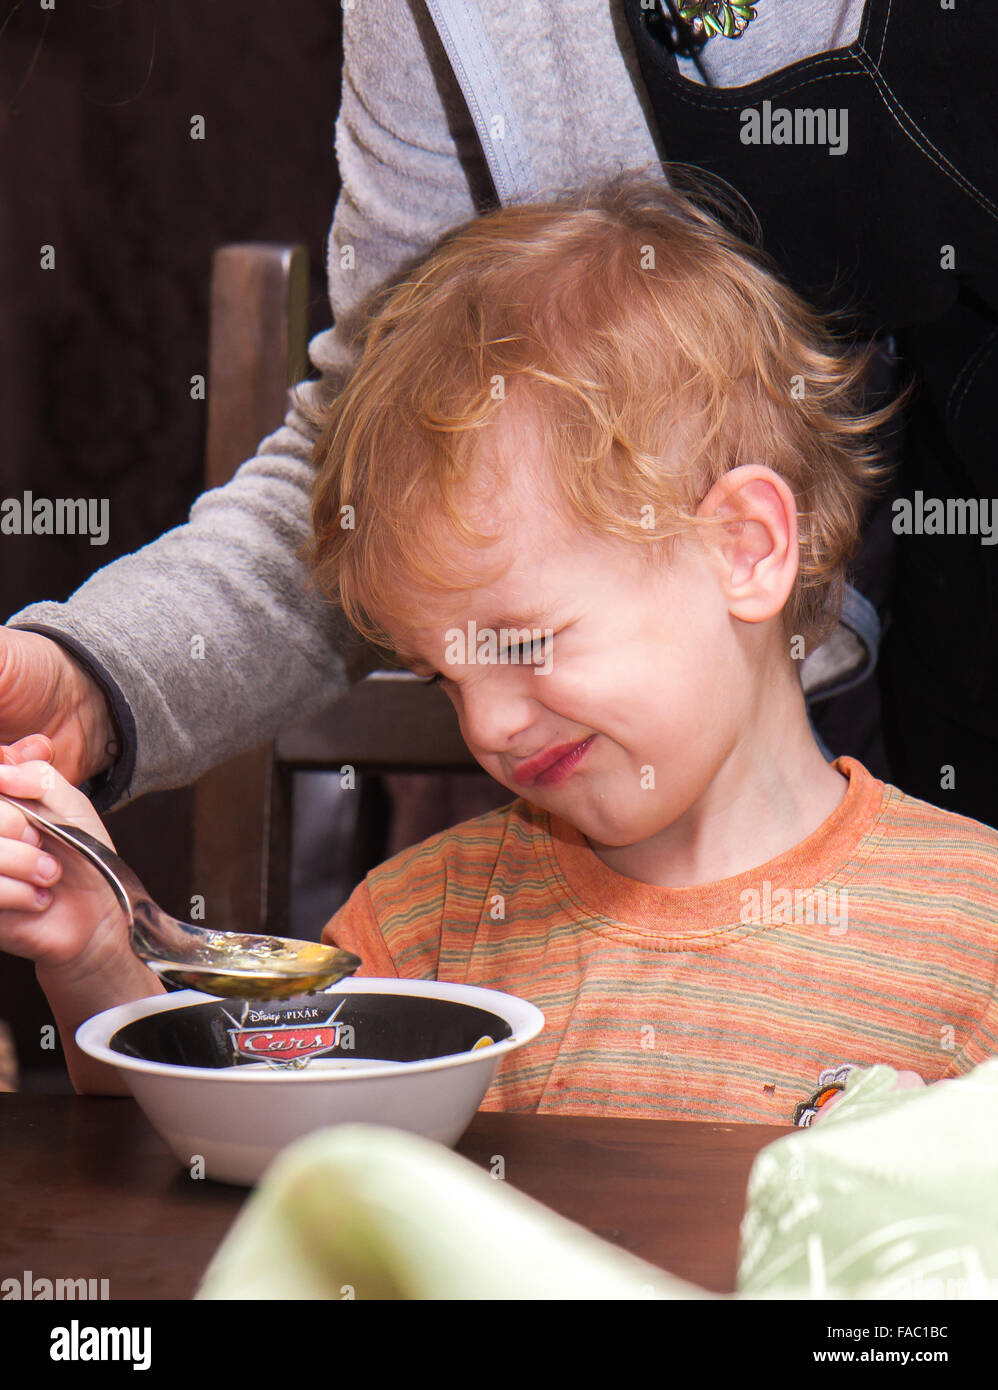 A young , blond hair boy is eating soup on his own . Stock Photo